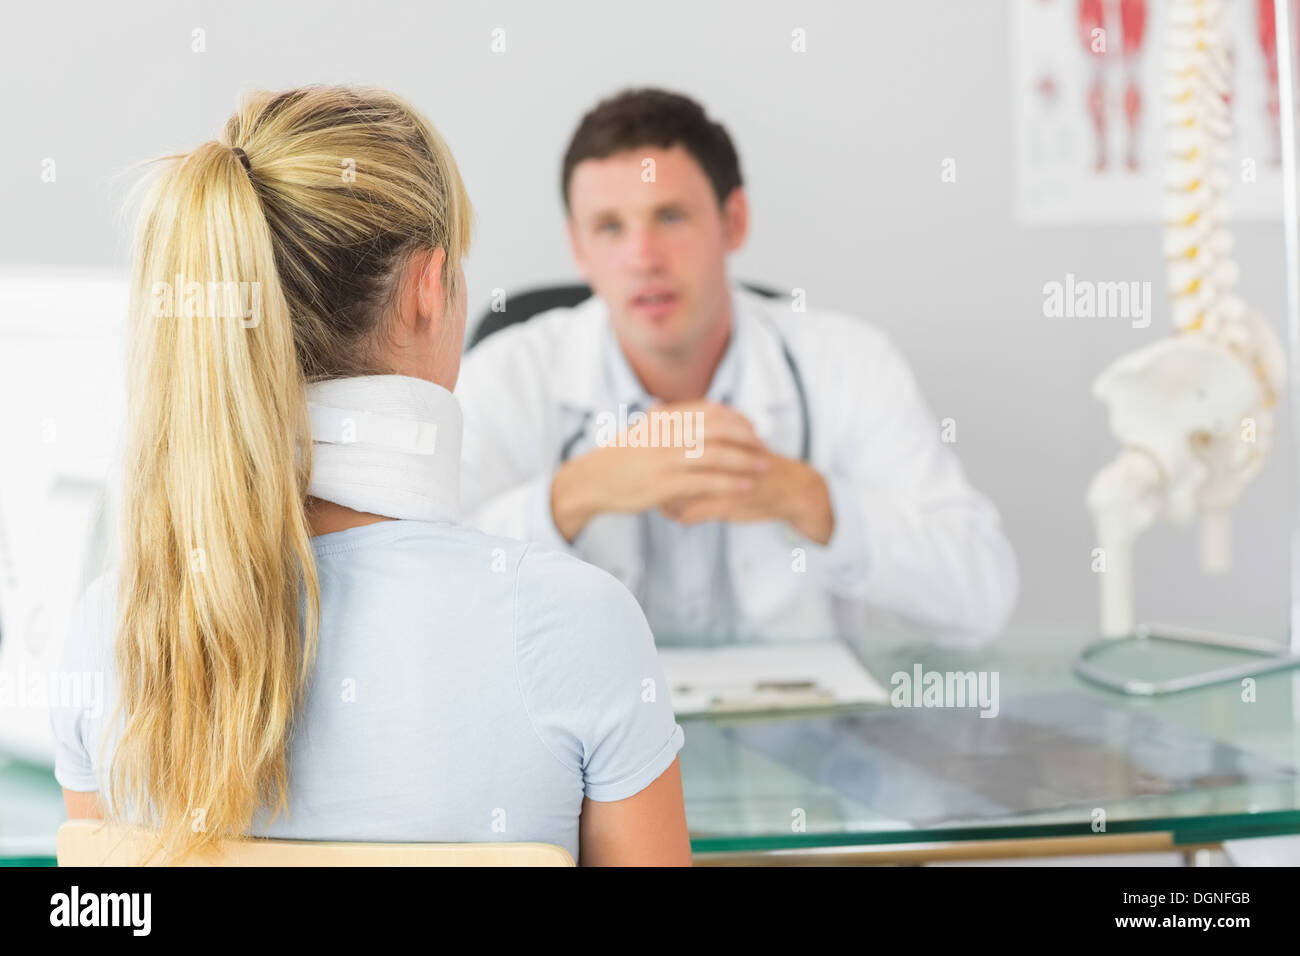 Attractive doctor having an appointment with a patient Stock Photo